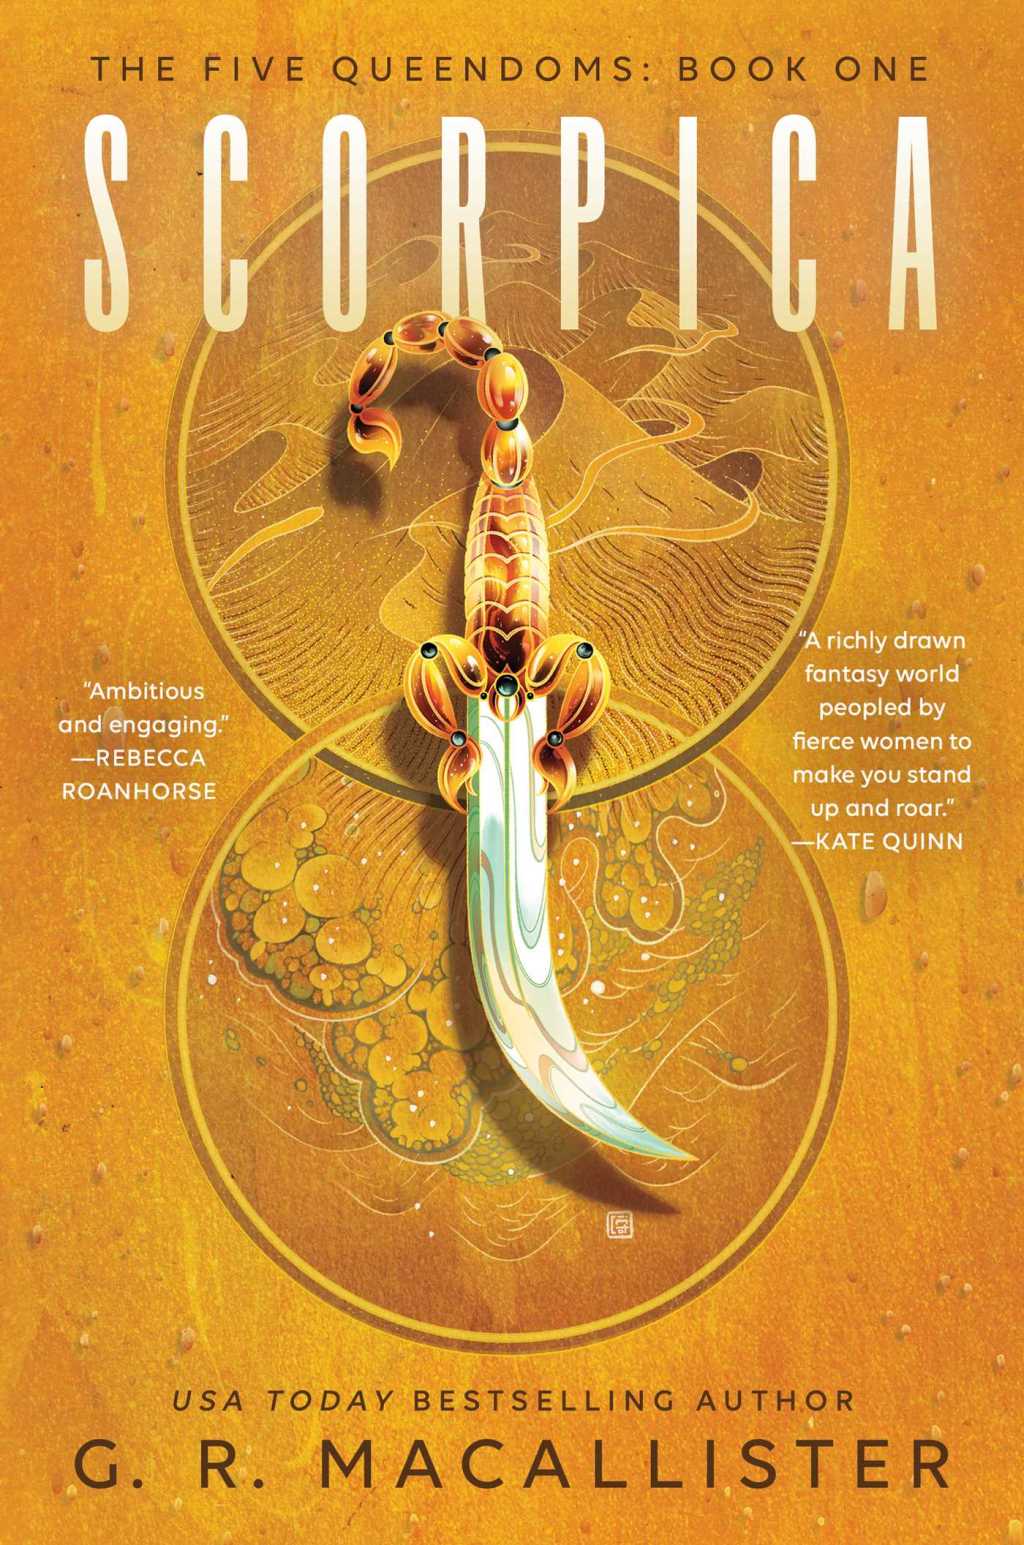 Book Review: Scorpica by G.R. Macallister (fantasy)